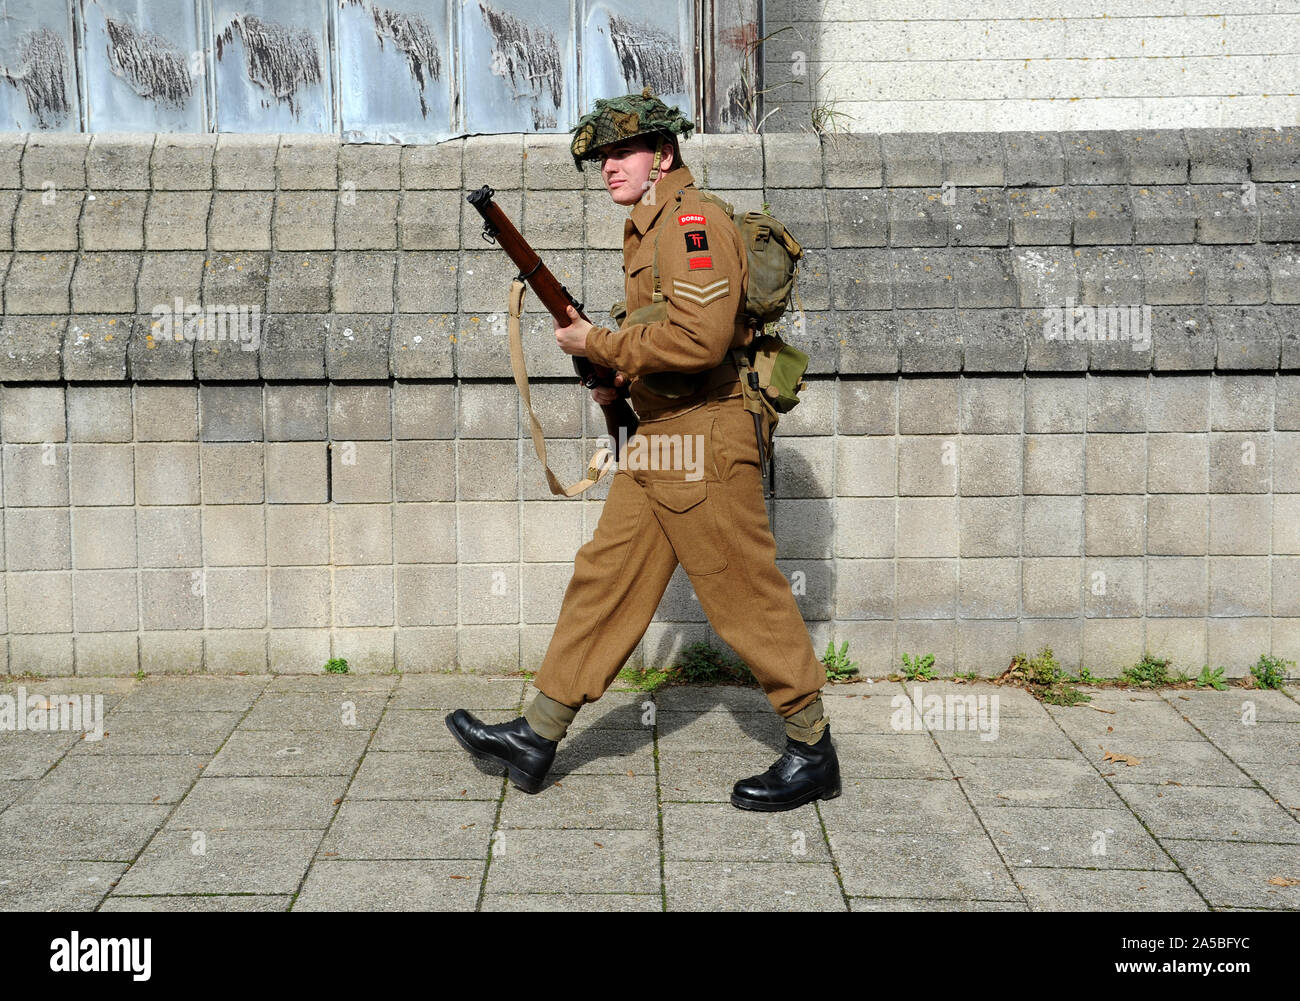 Re-enactors dressed as British soldiers from World War 2 Stock Photo